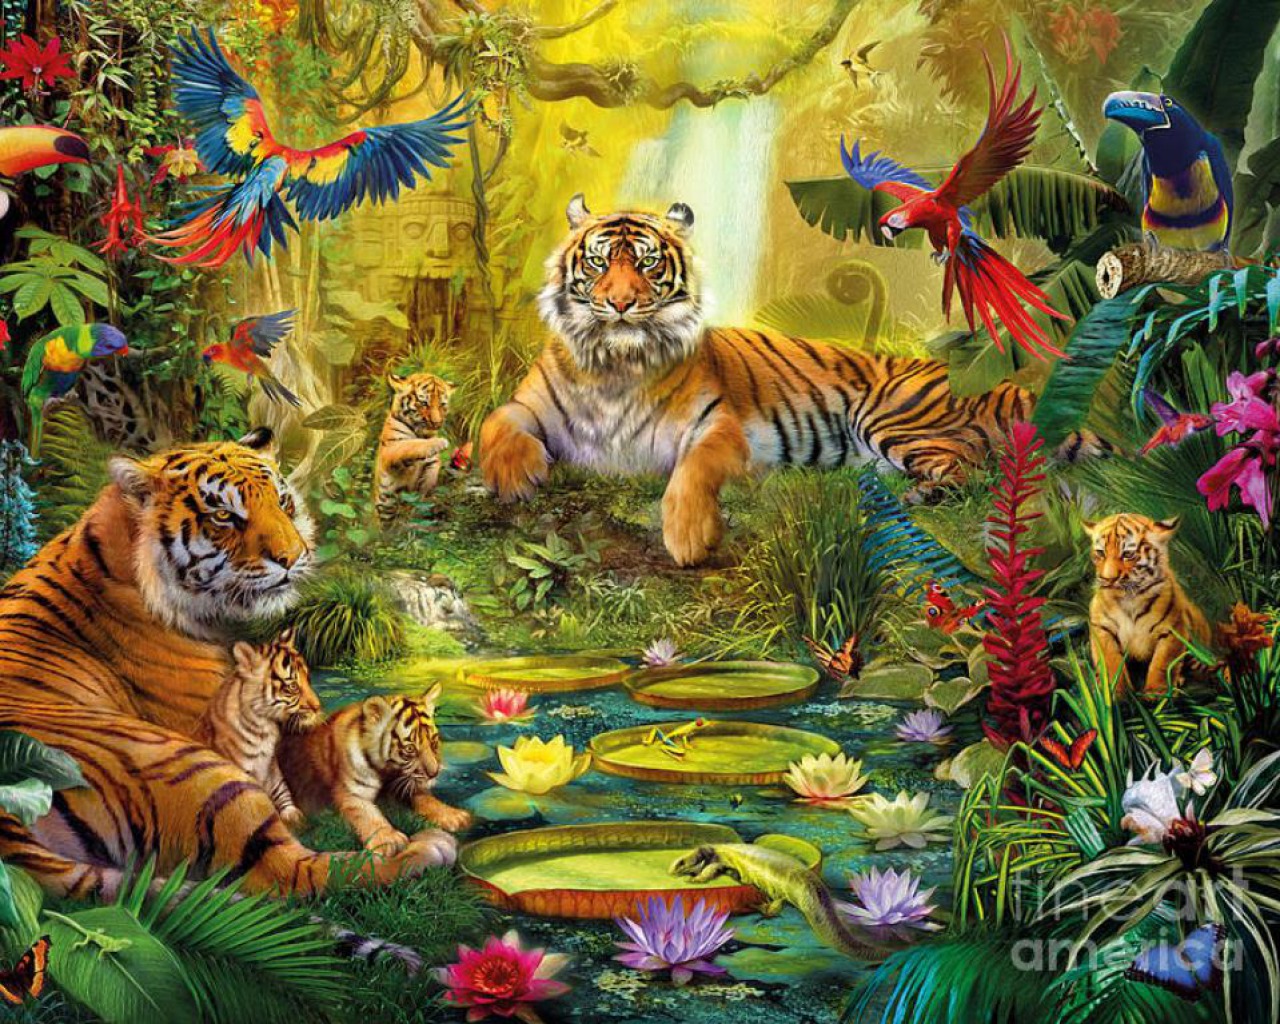  August 7 2015 By Stephen Comments Off on Jungle HD Animal Wallpapers